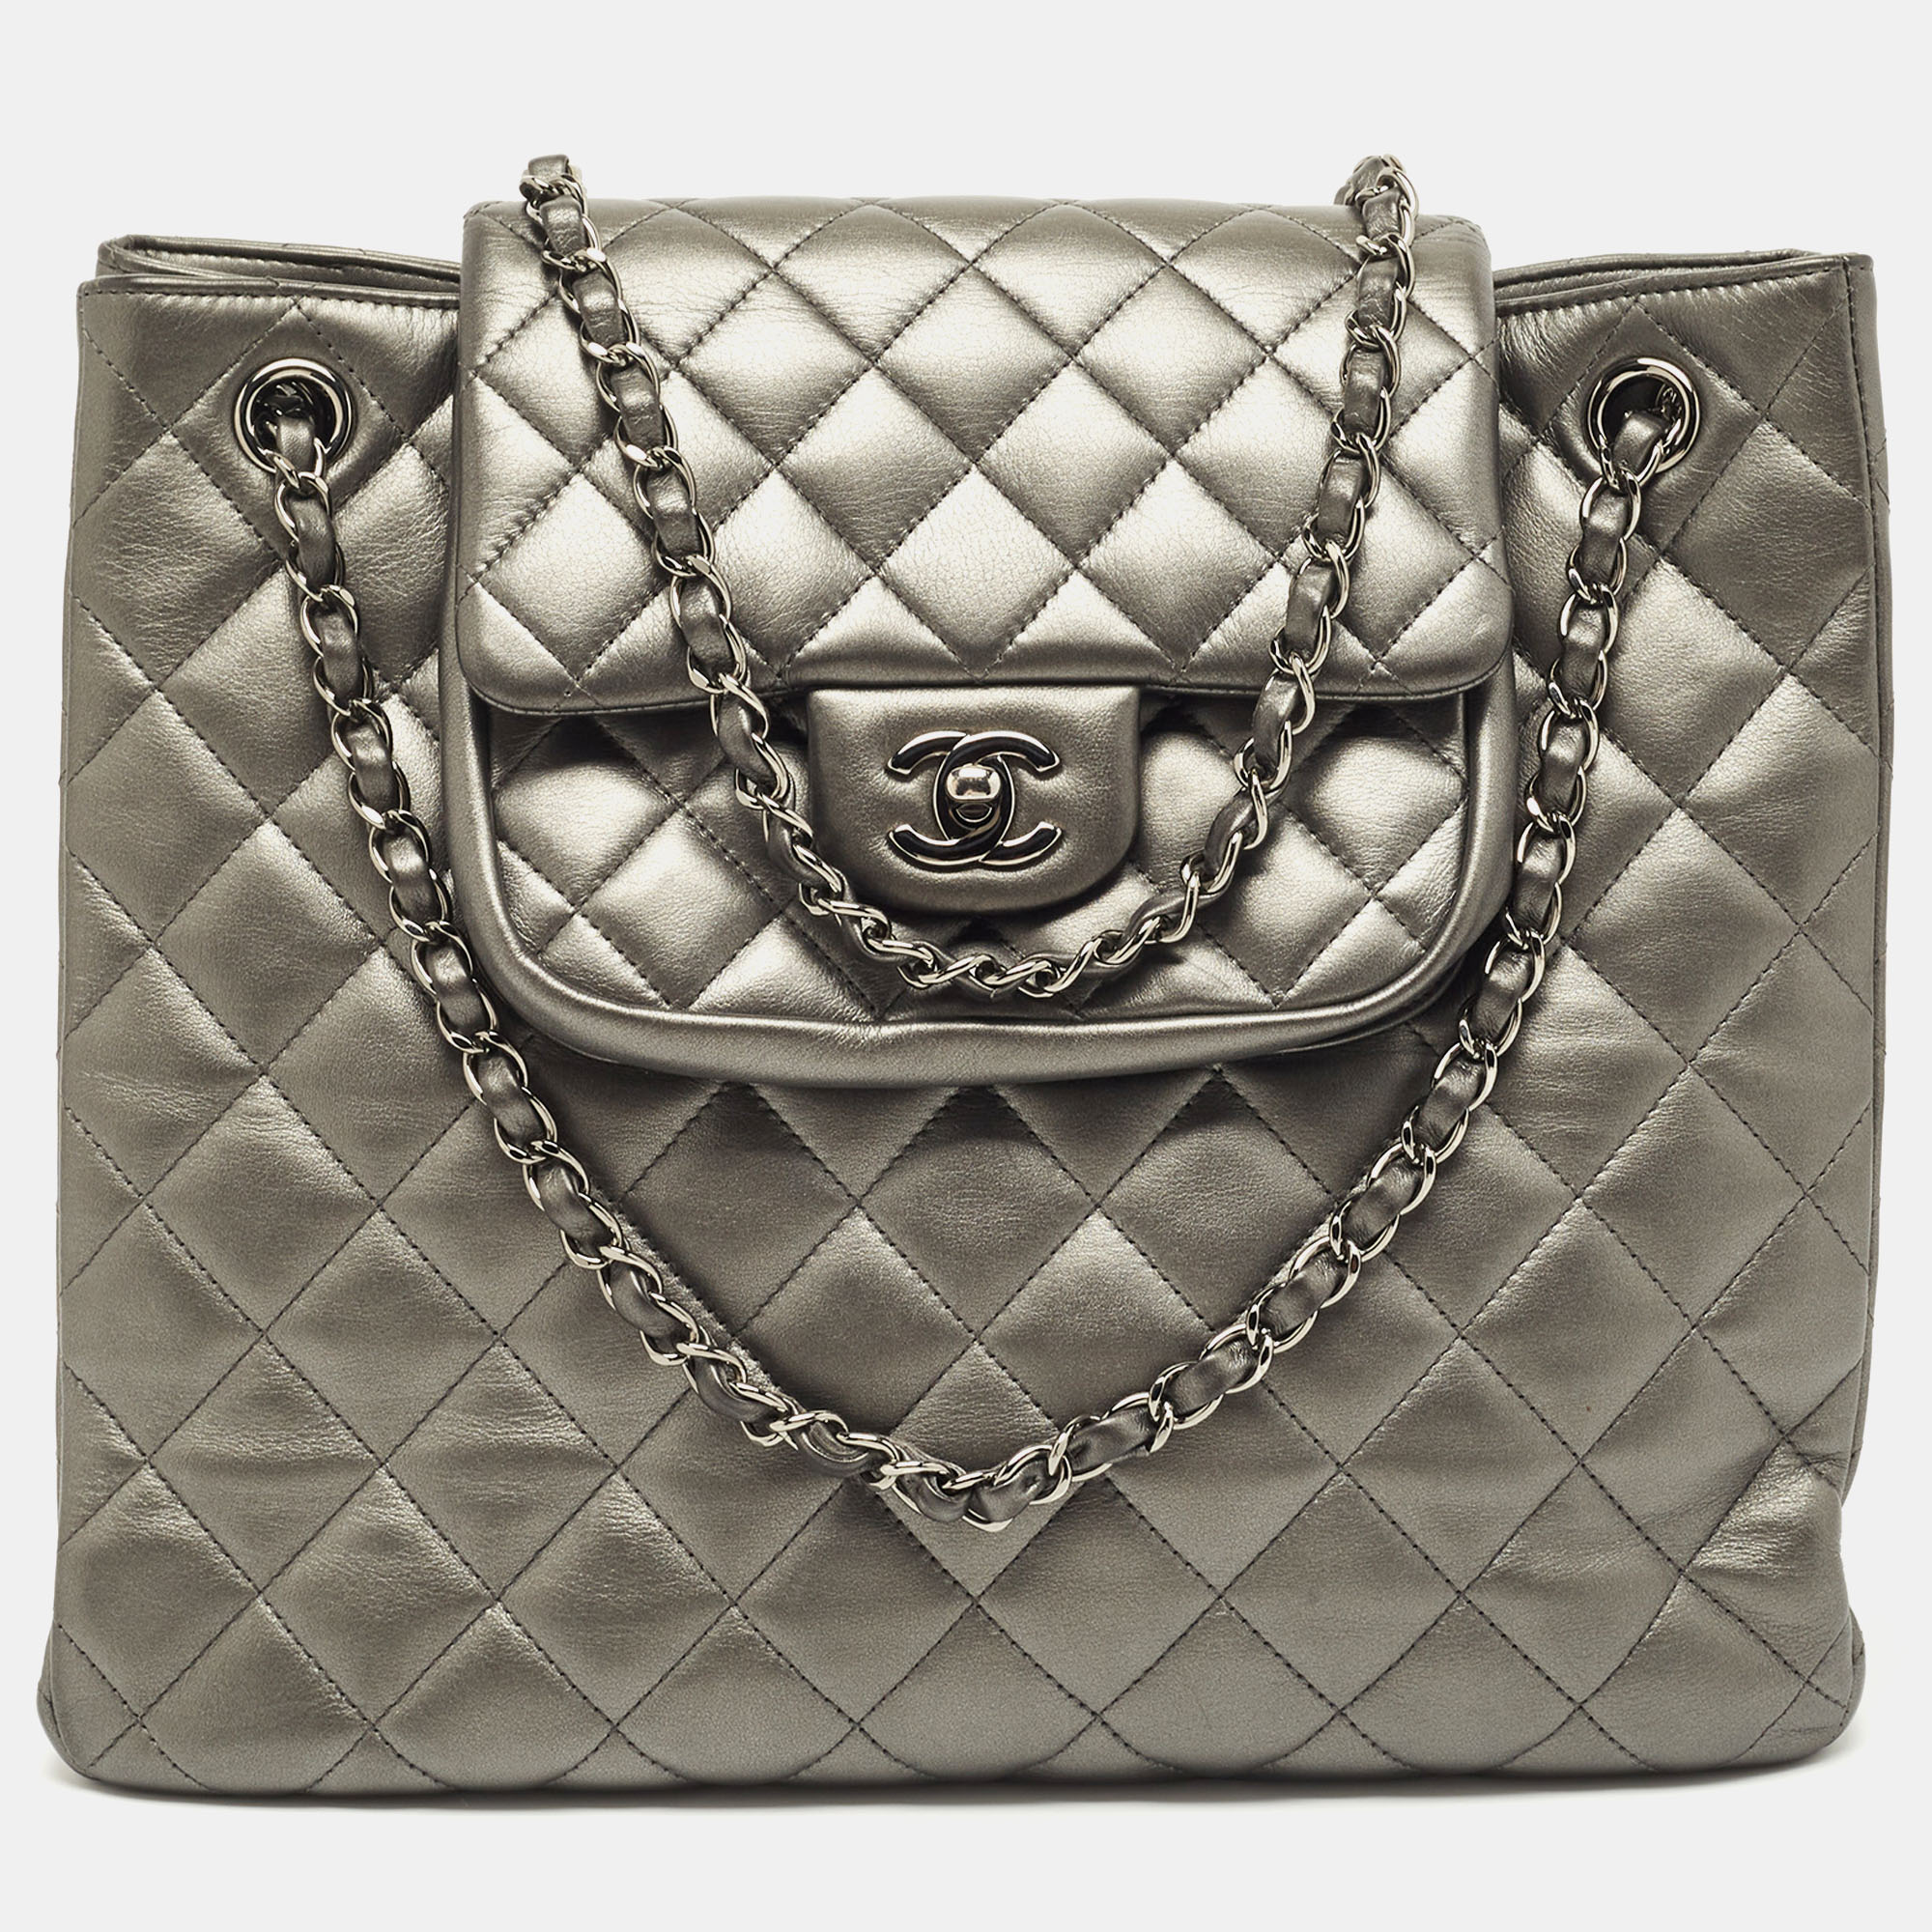 Pre-owned Chanel Dark Grey Quilted Leather Front Flap Pocket Tote